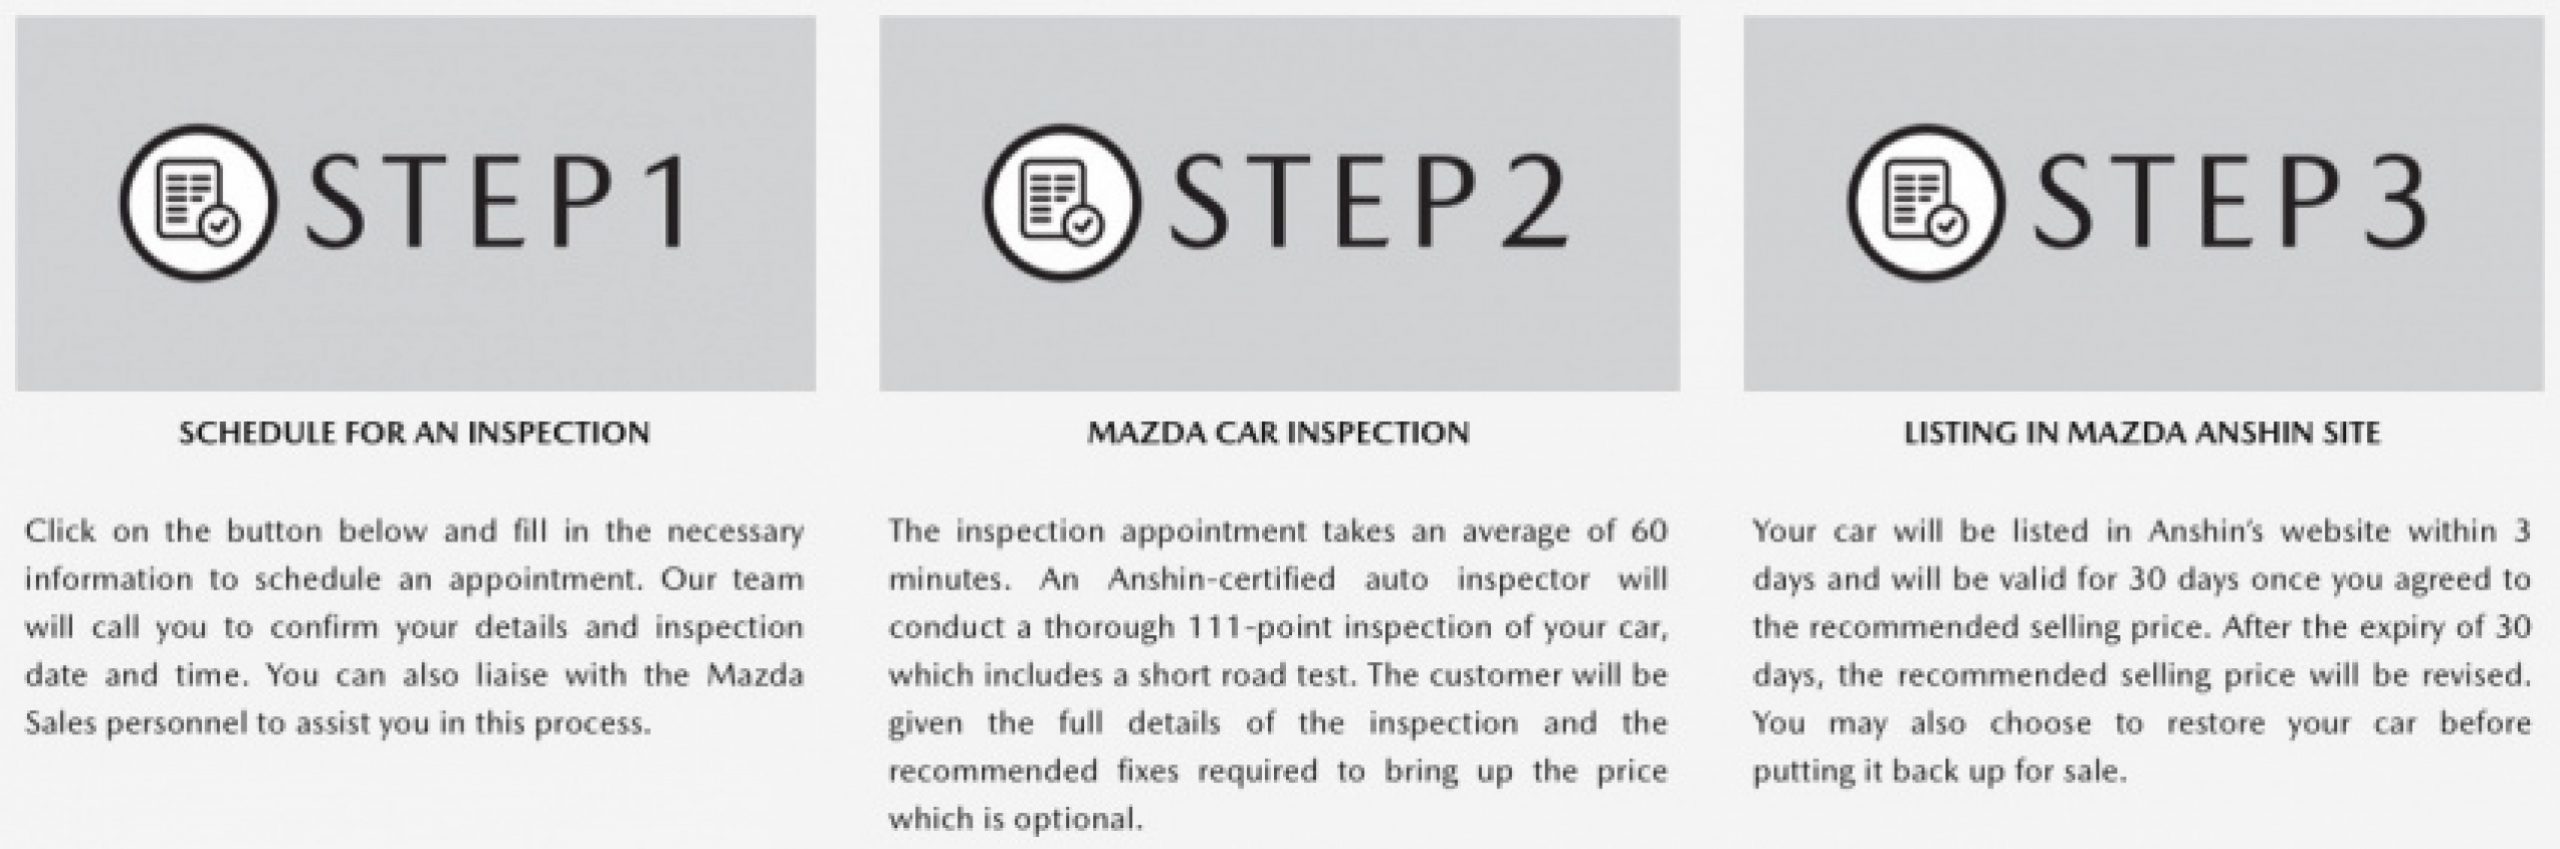 autos, car brands, cars, mazda, automotive, bermaz motor, cars, malaysia, mazda anshin, preowned, used cars, mazda anshin website provides convenient one-stop platform for buying or selling preowned mazda